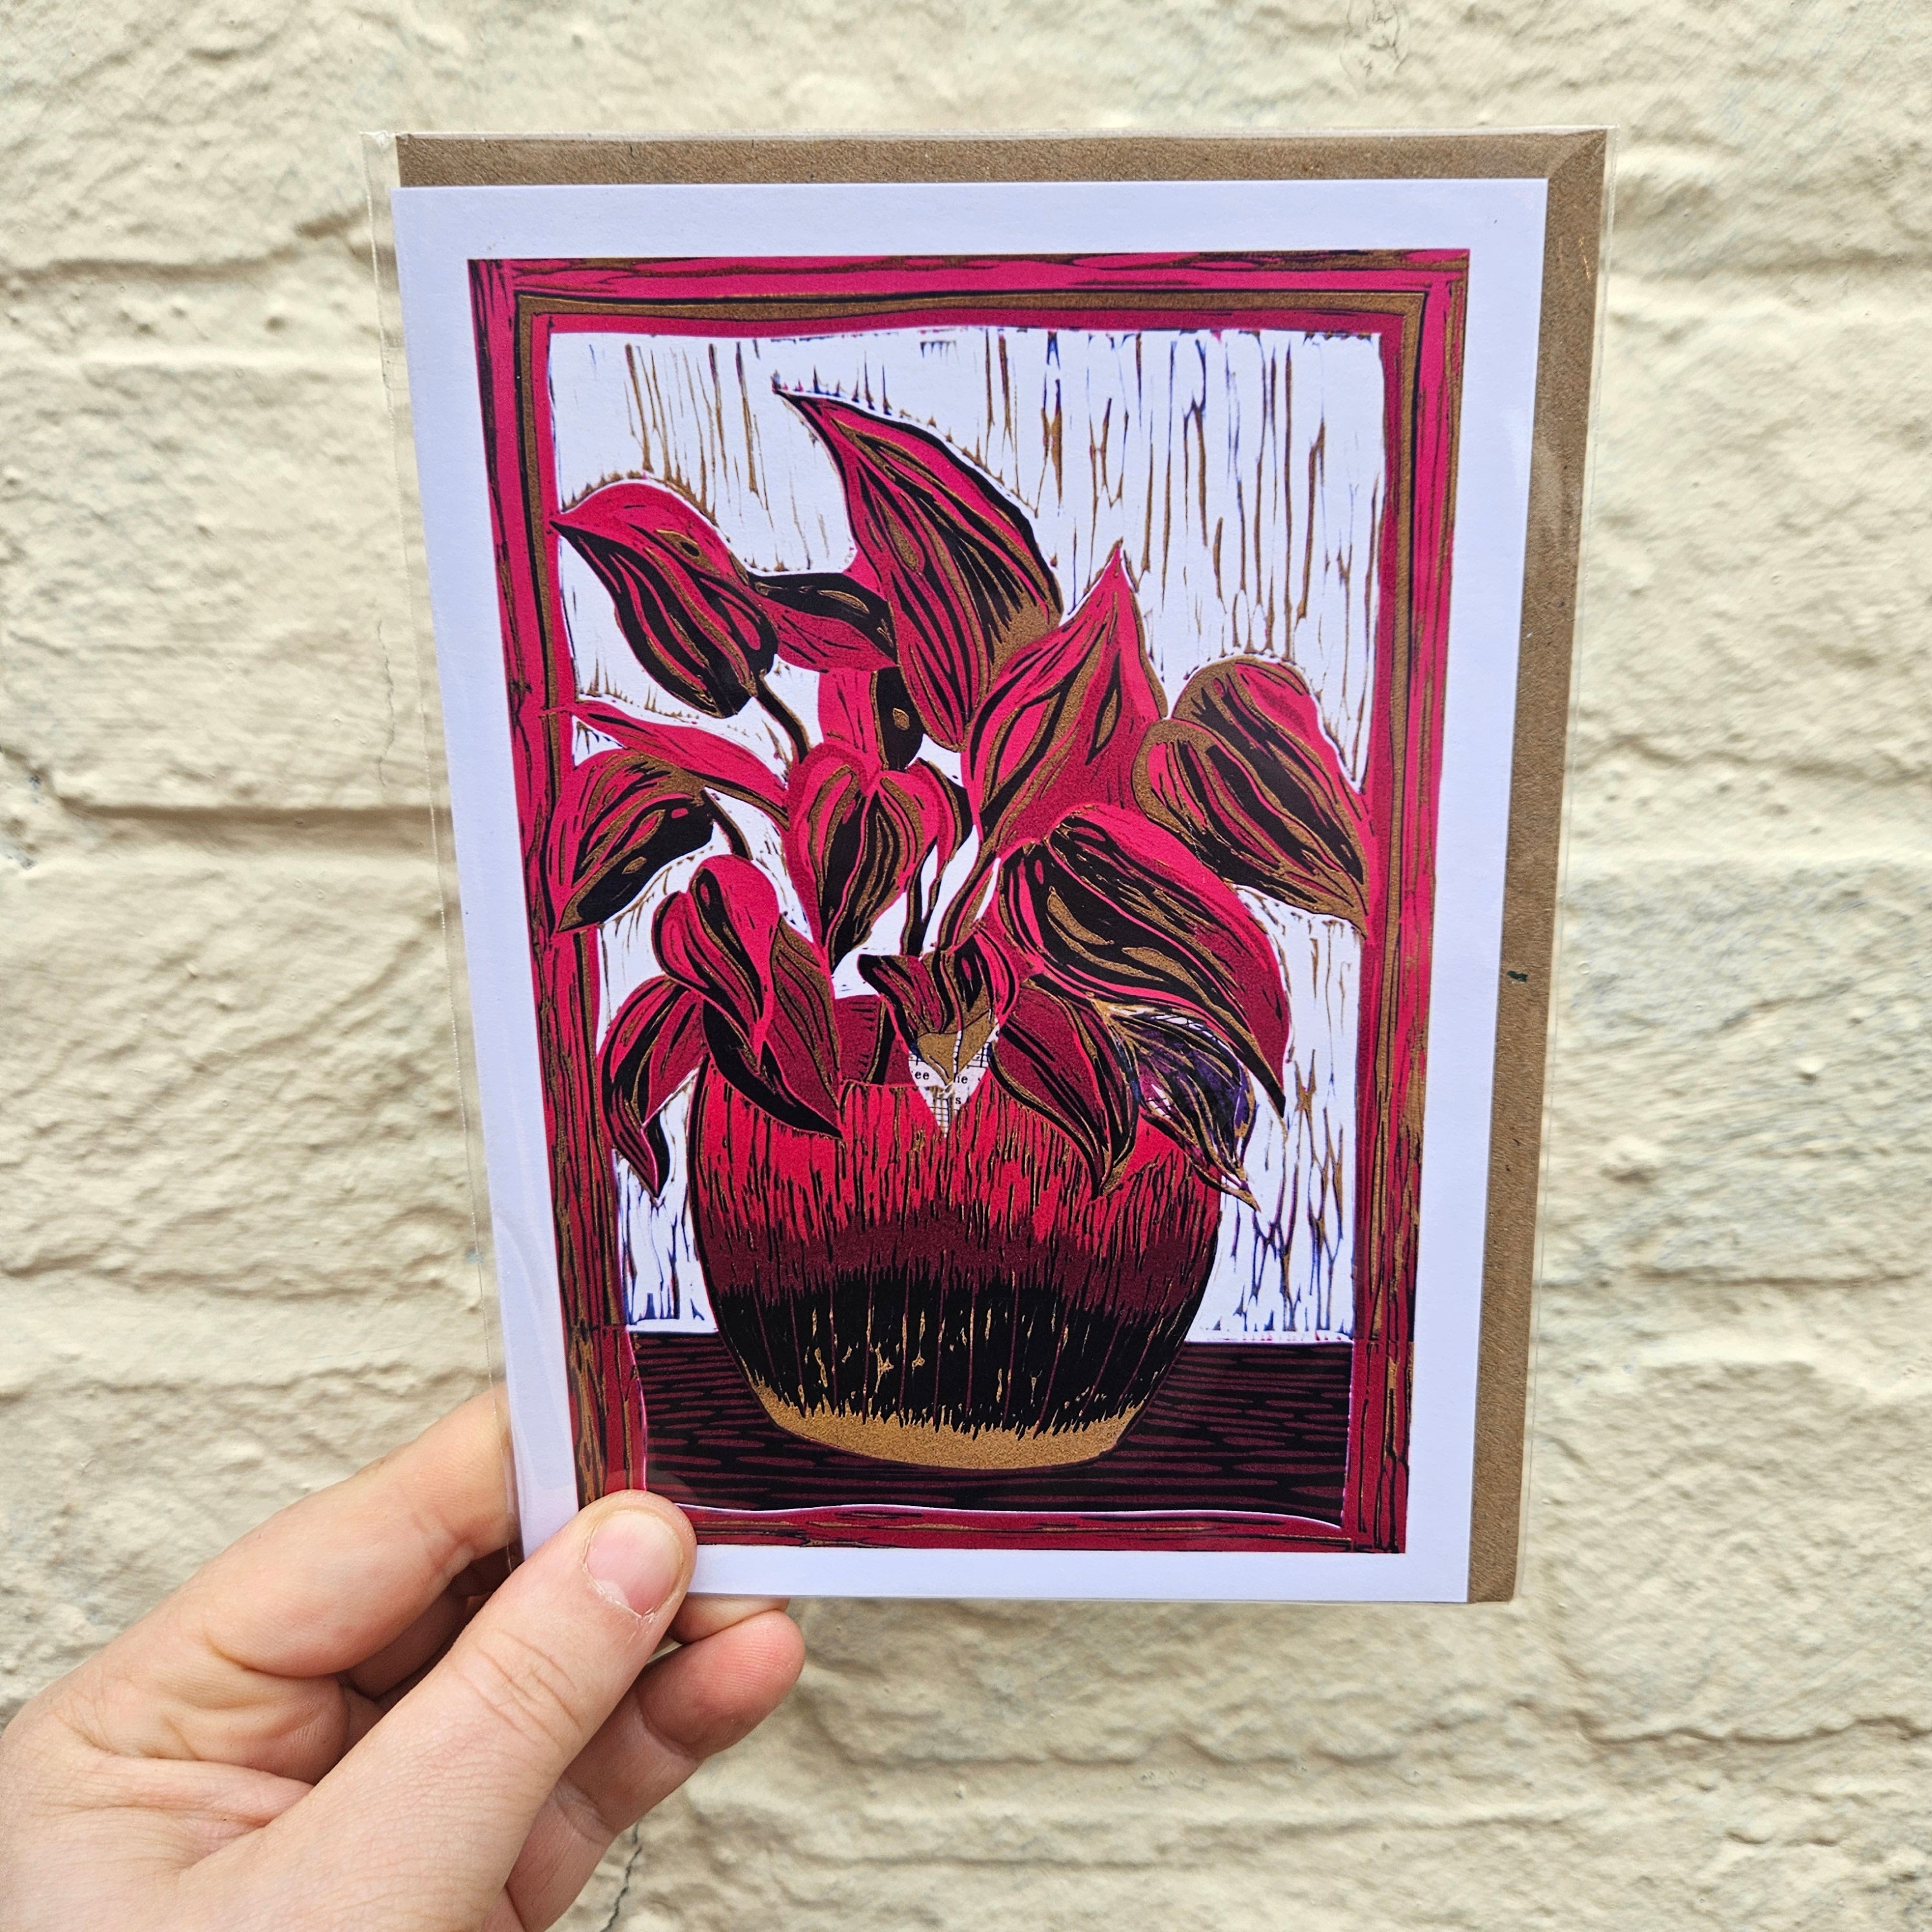 House plant linocut greeting cards by EJ Sparkles